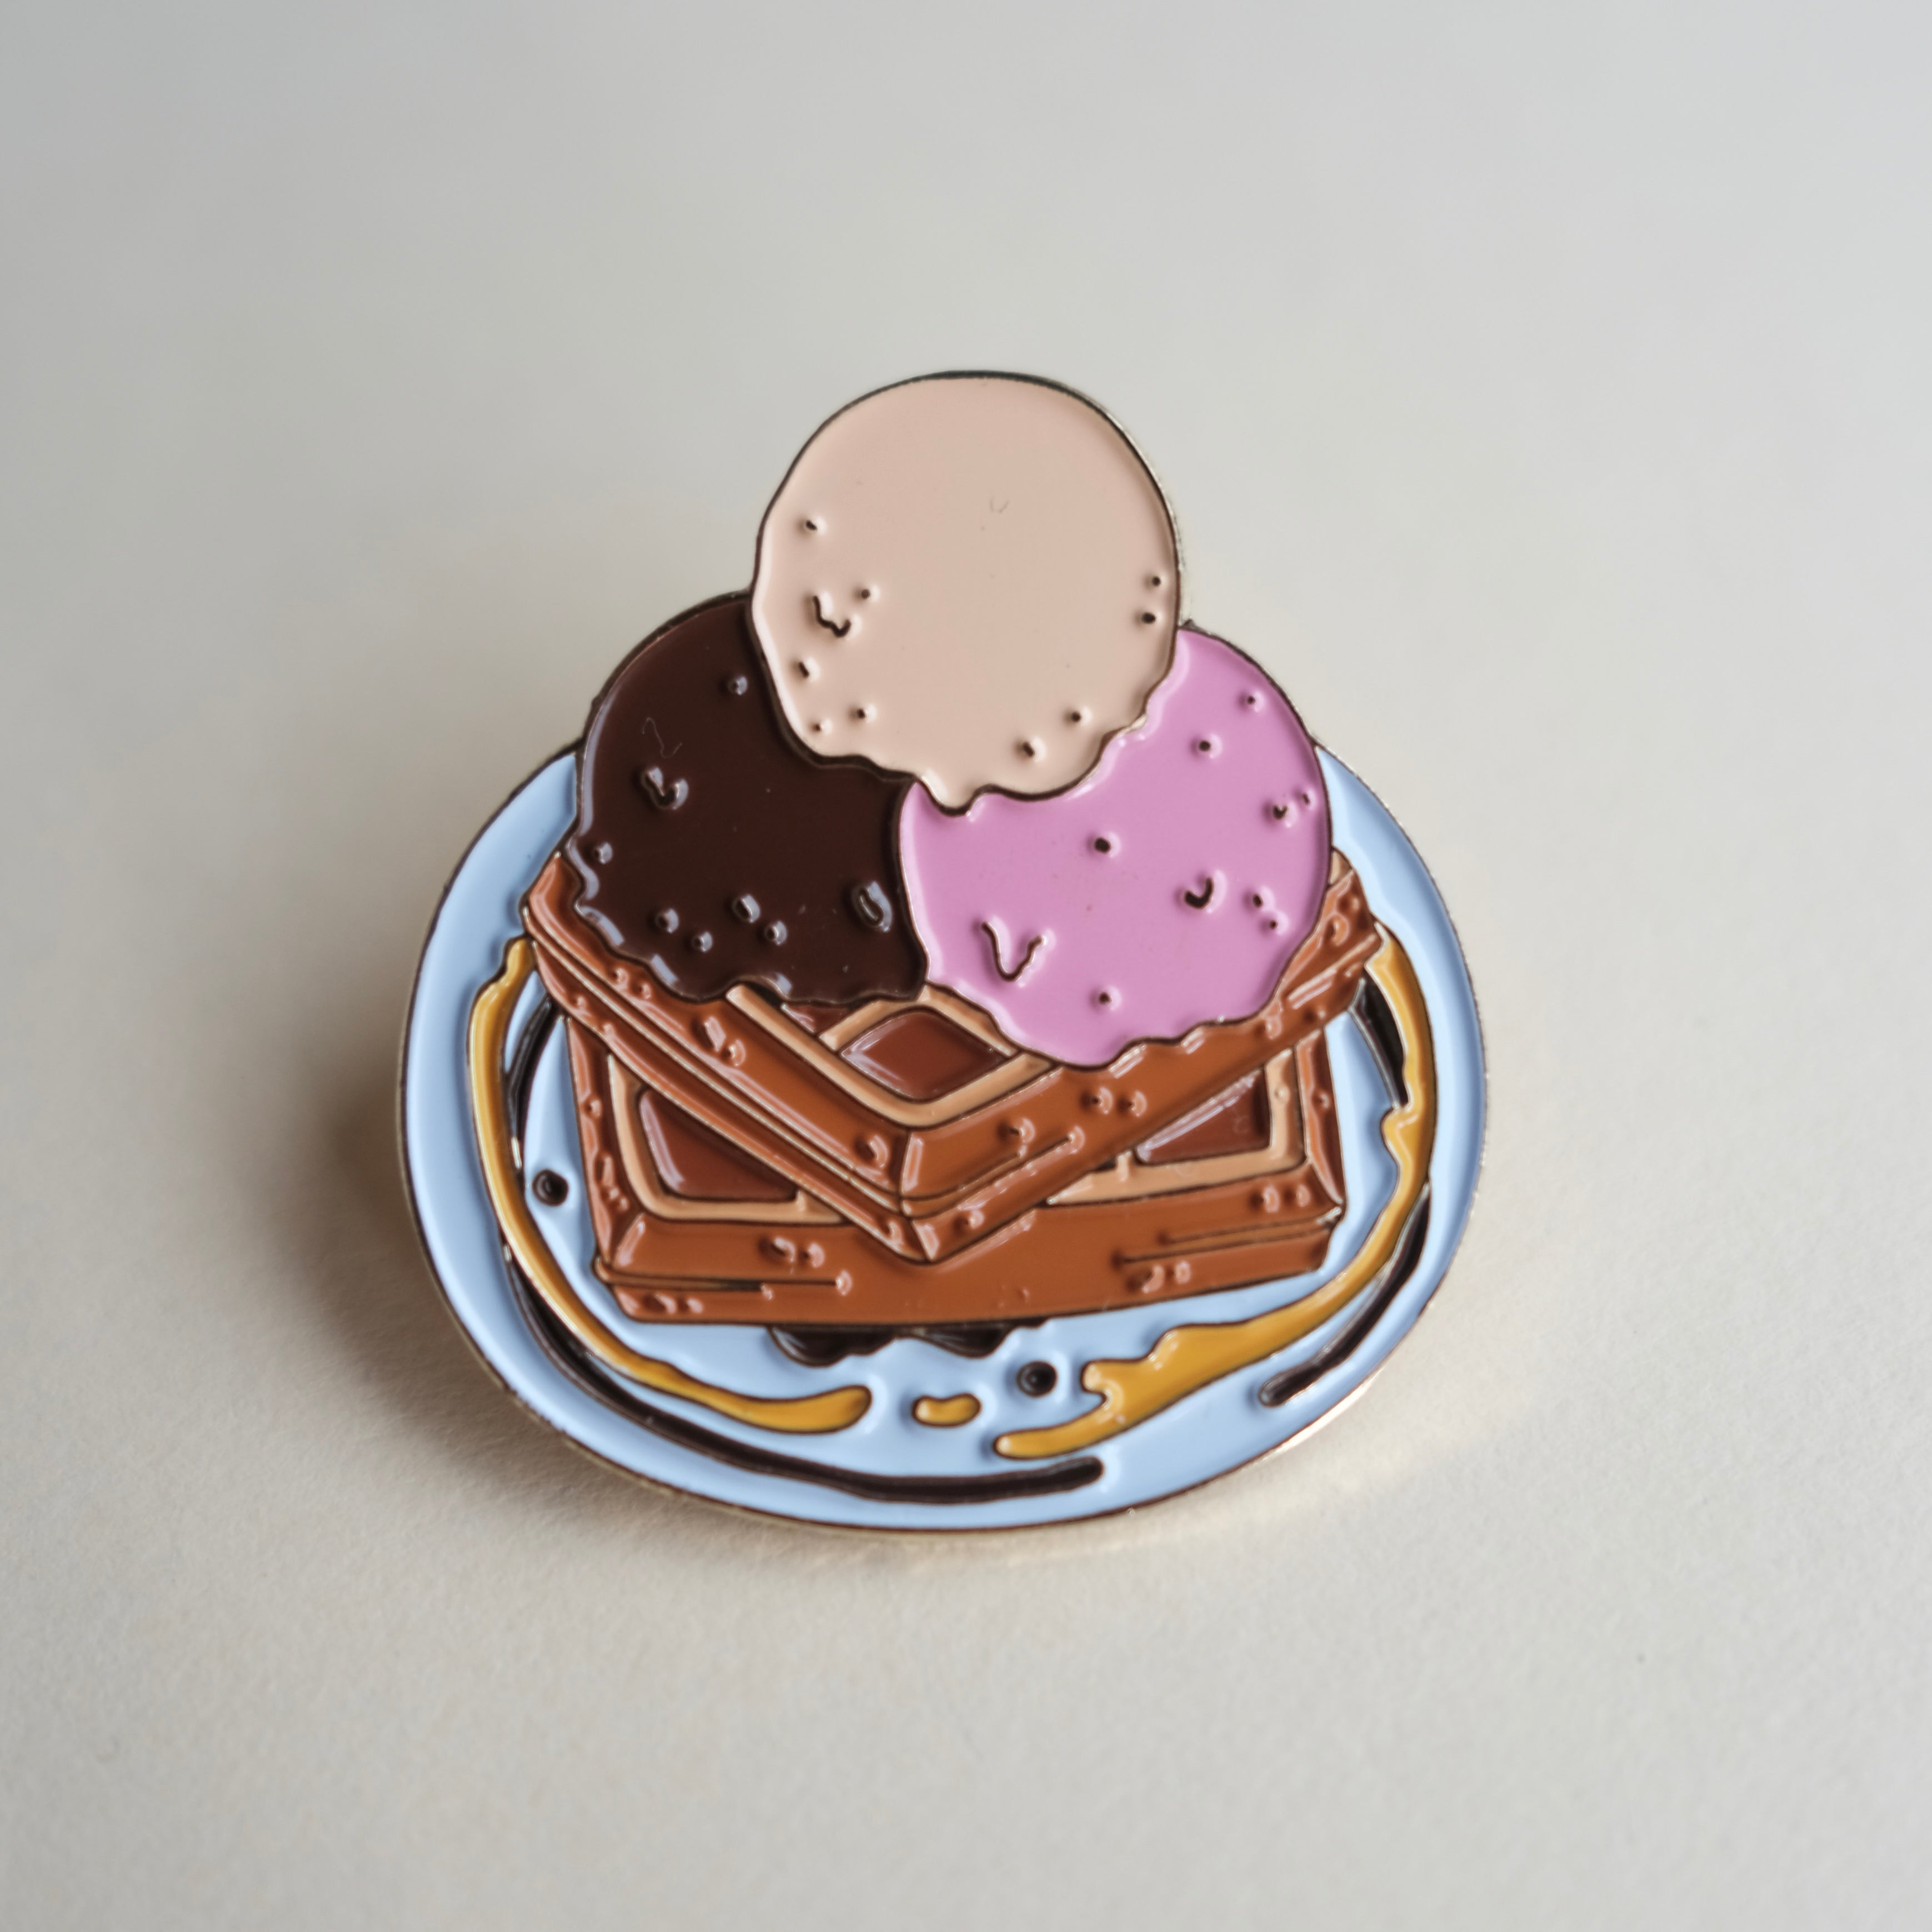 Whimsical Style with Triple Scoop Waffles Pins